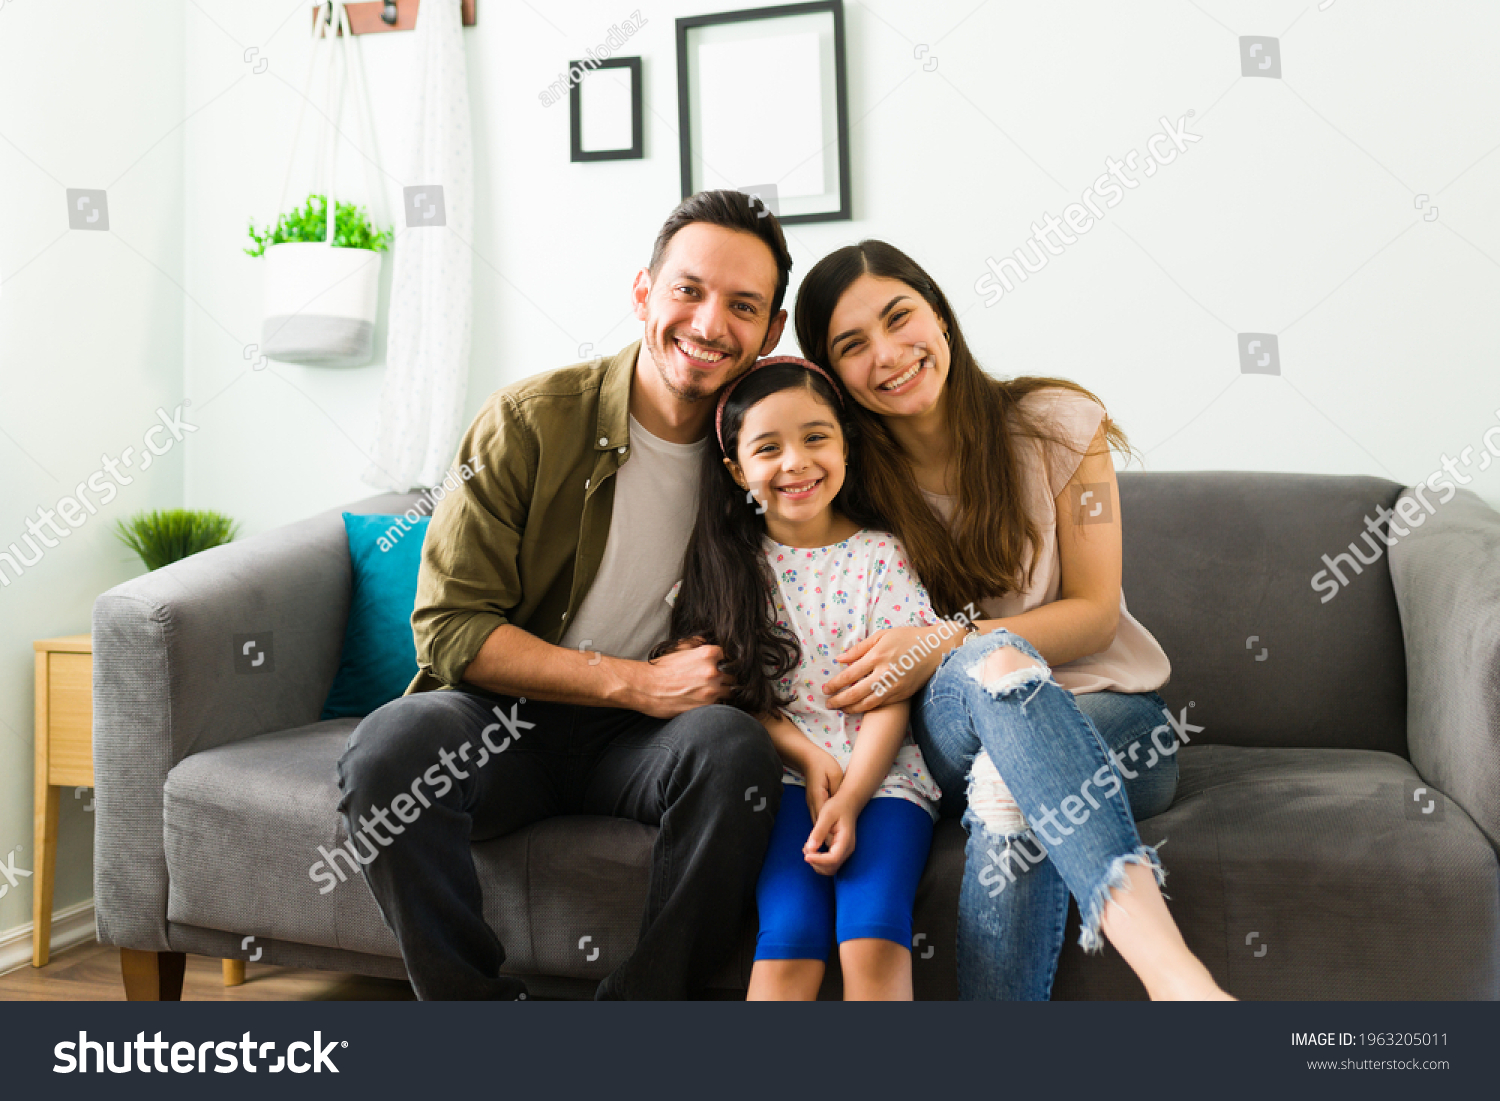 Happy young family of mom, dad and daughter laughing and making eye contact while relaxing together on the living room sofa  #1963205011